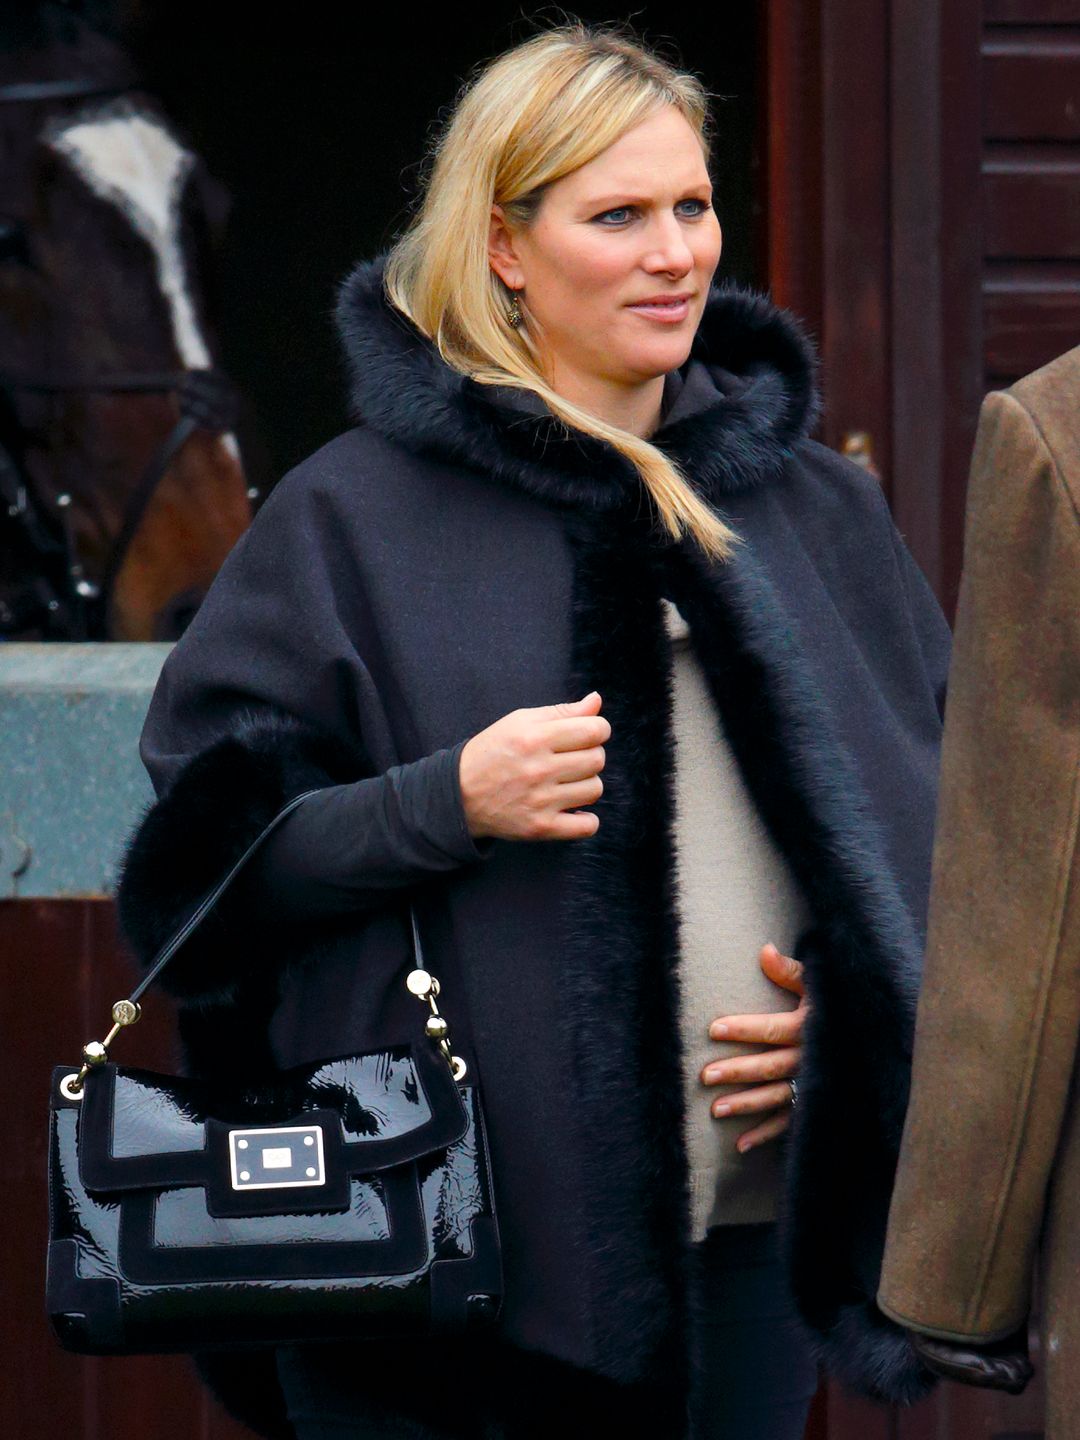 Zara Phillips pregnant with her daughter Mia